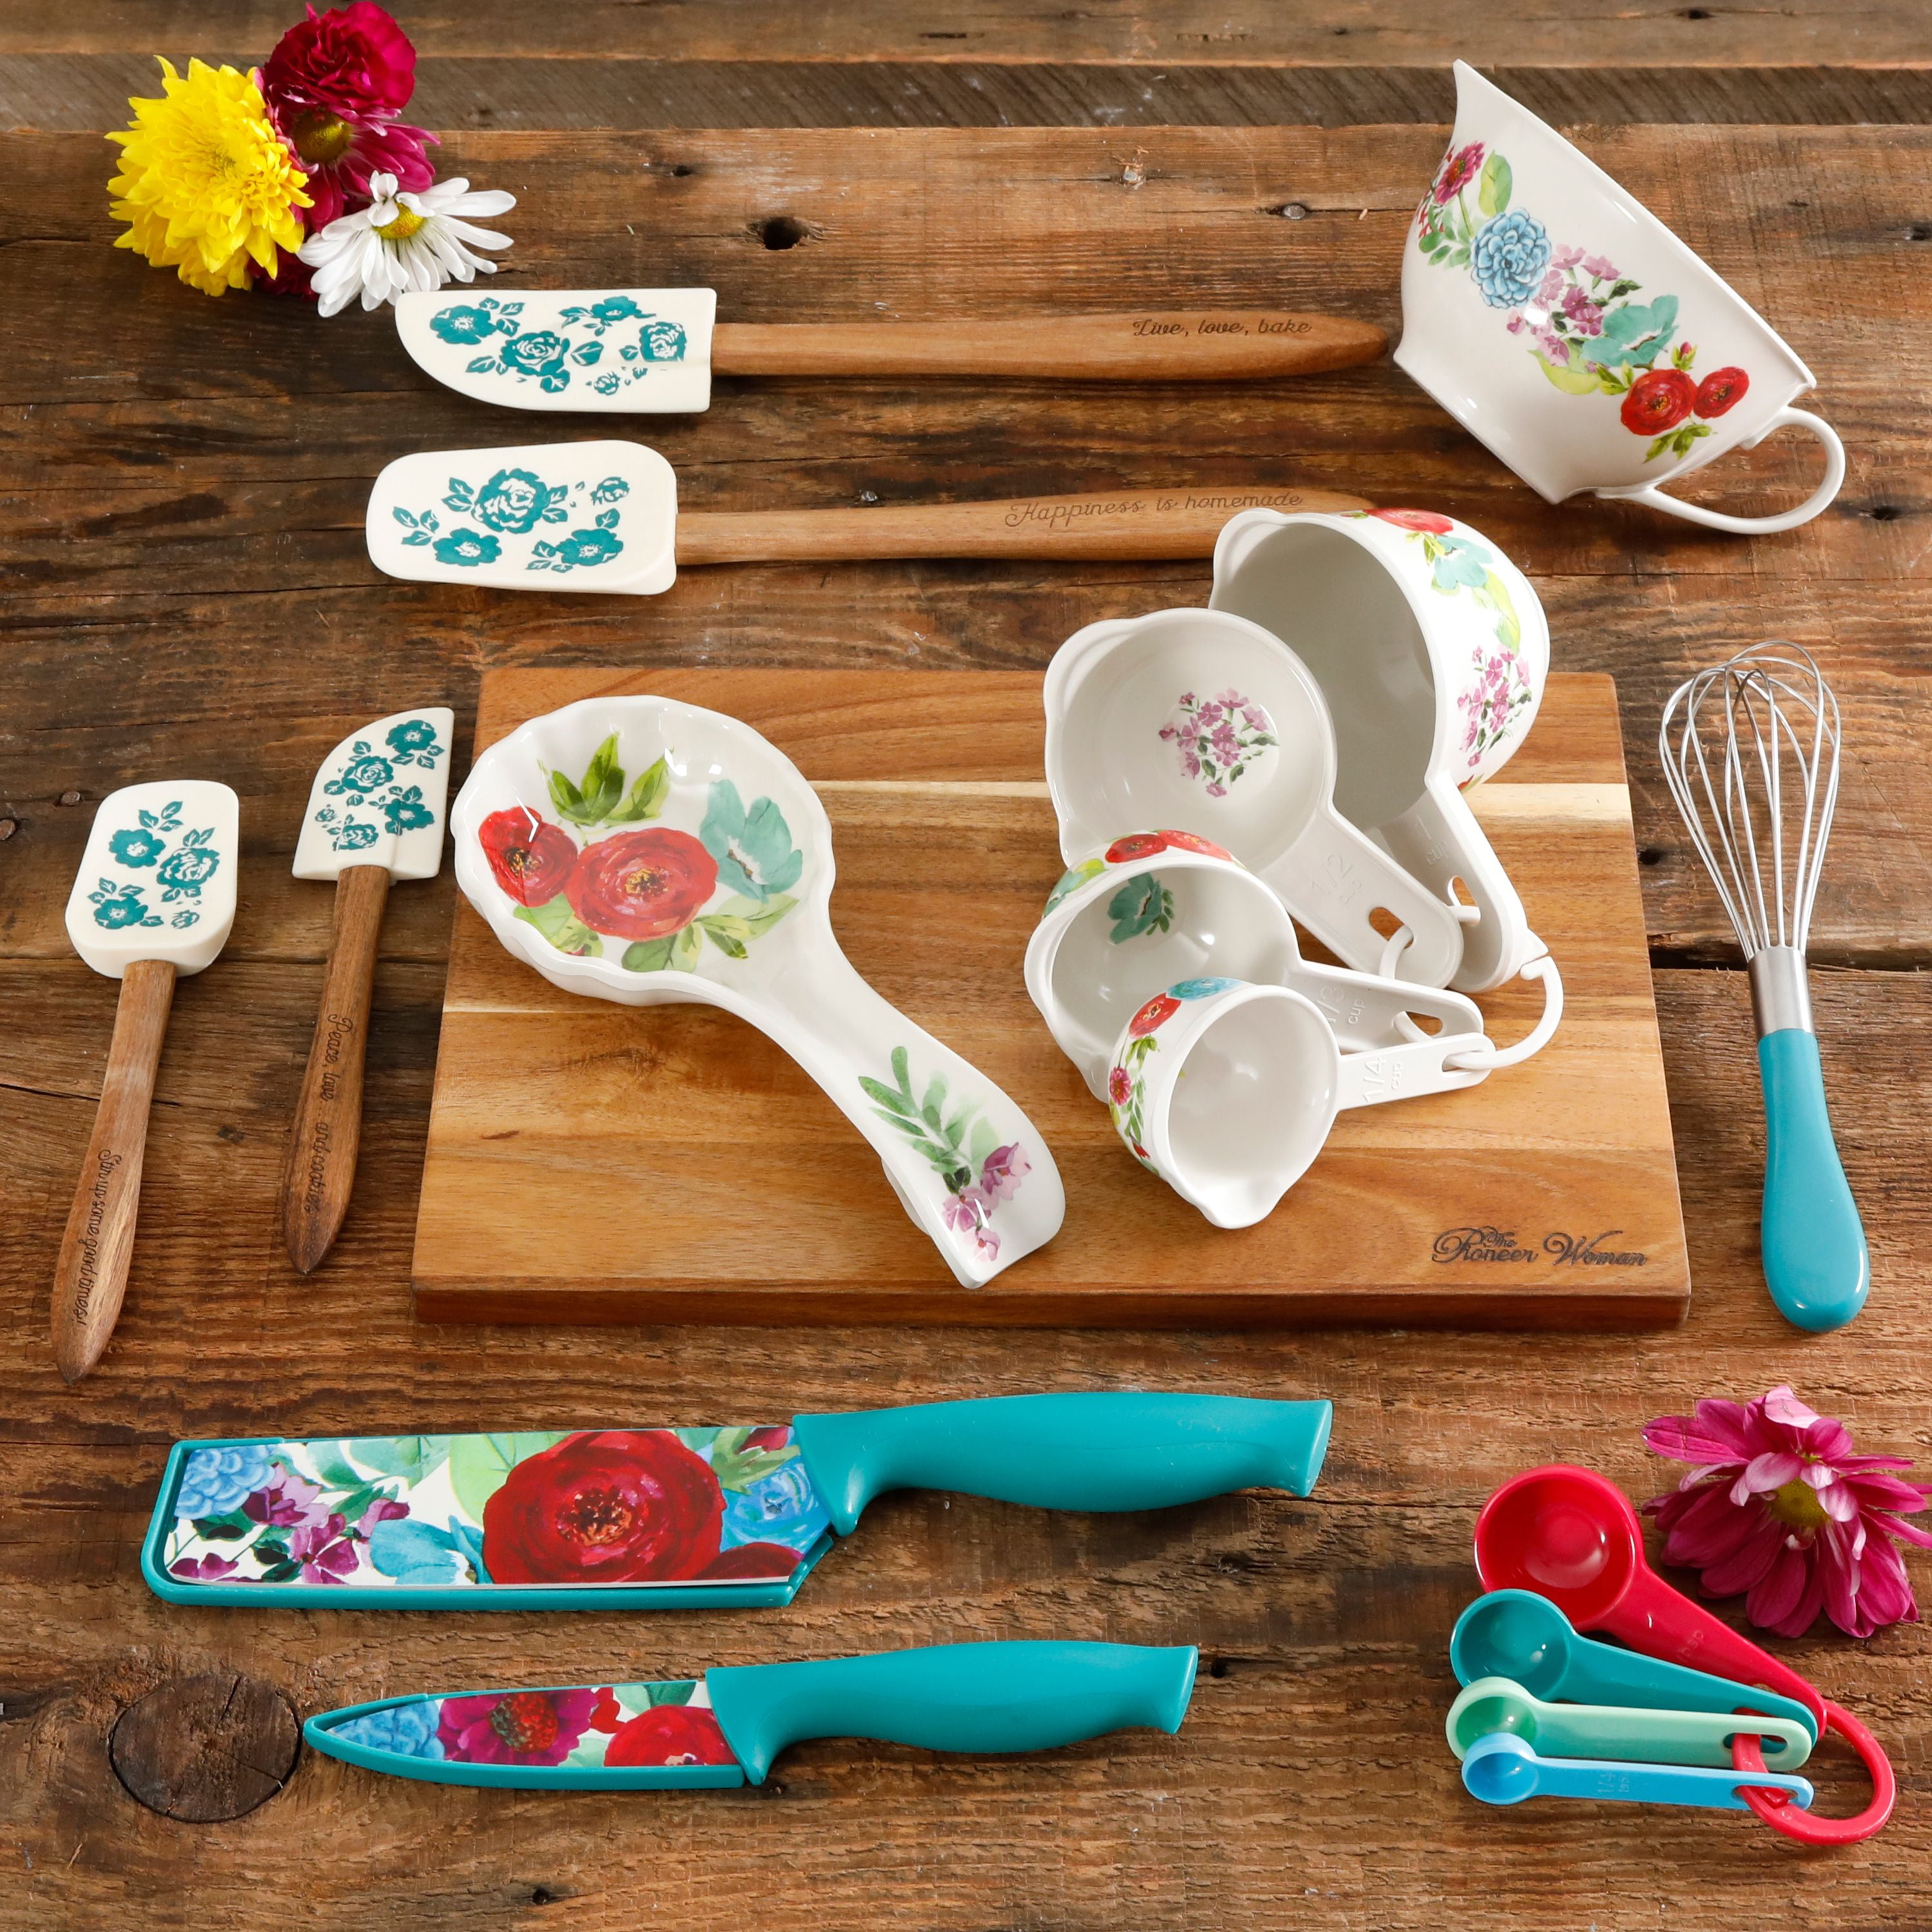 Pioneer Woman Kitchen Items – Life According to Jamie